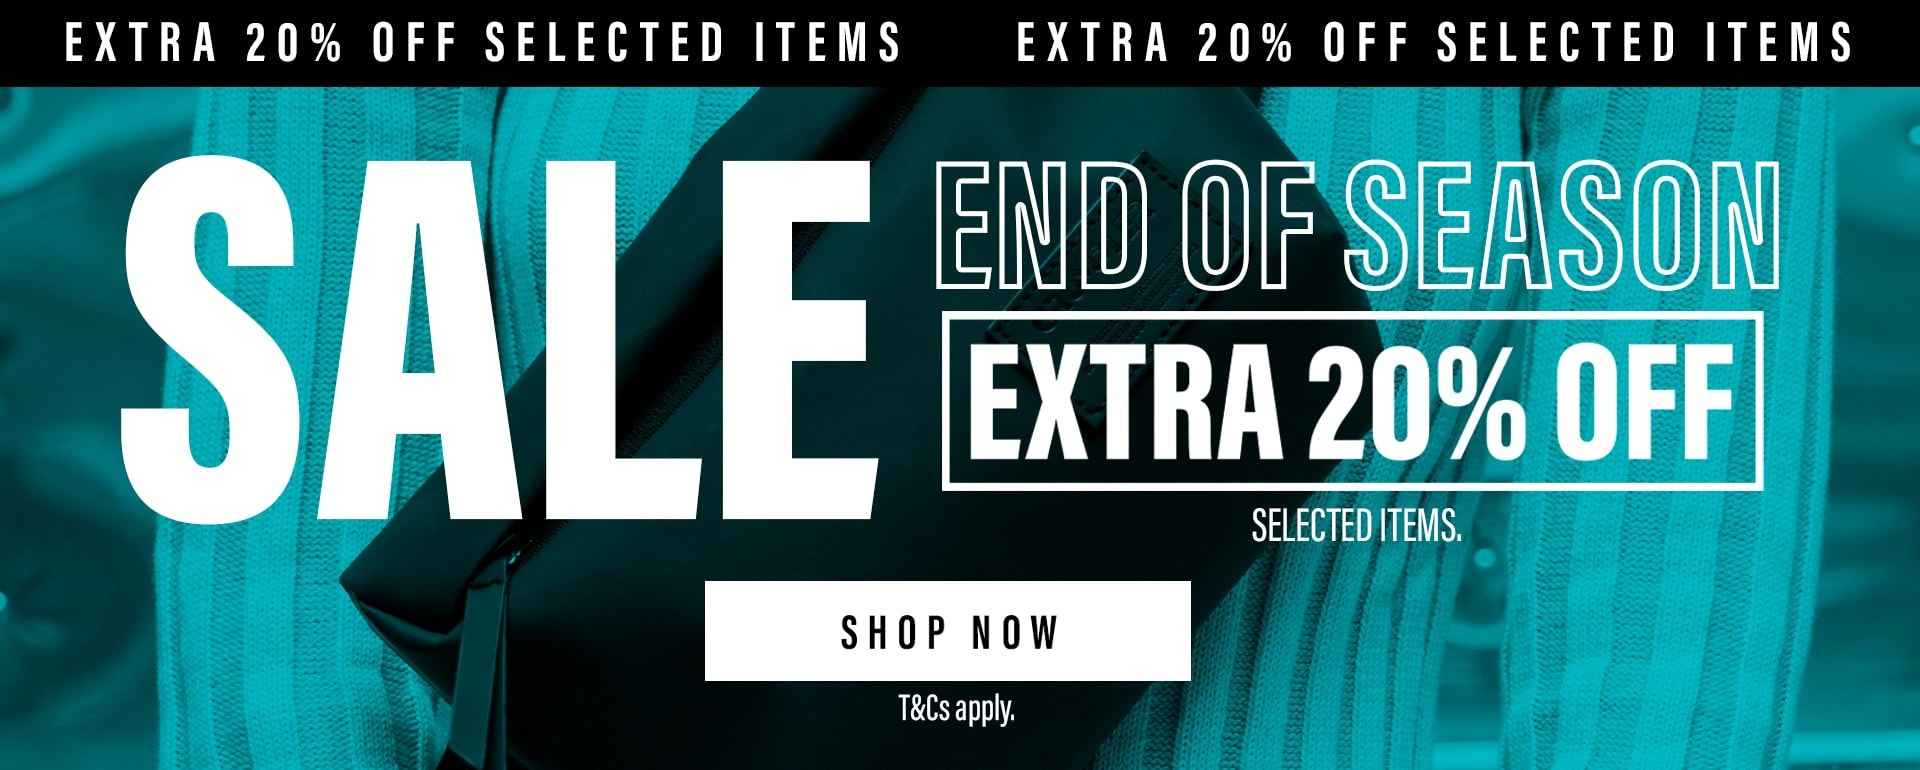 Extra 20% OFF on End of Season sale at Crumpler